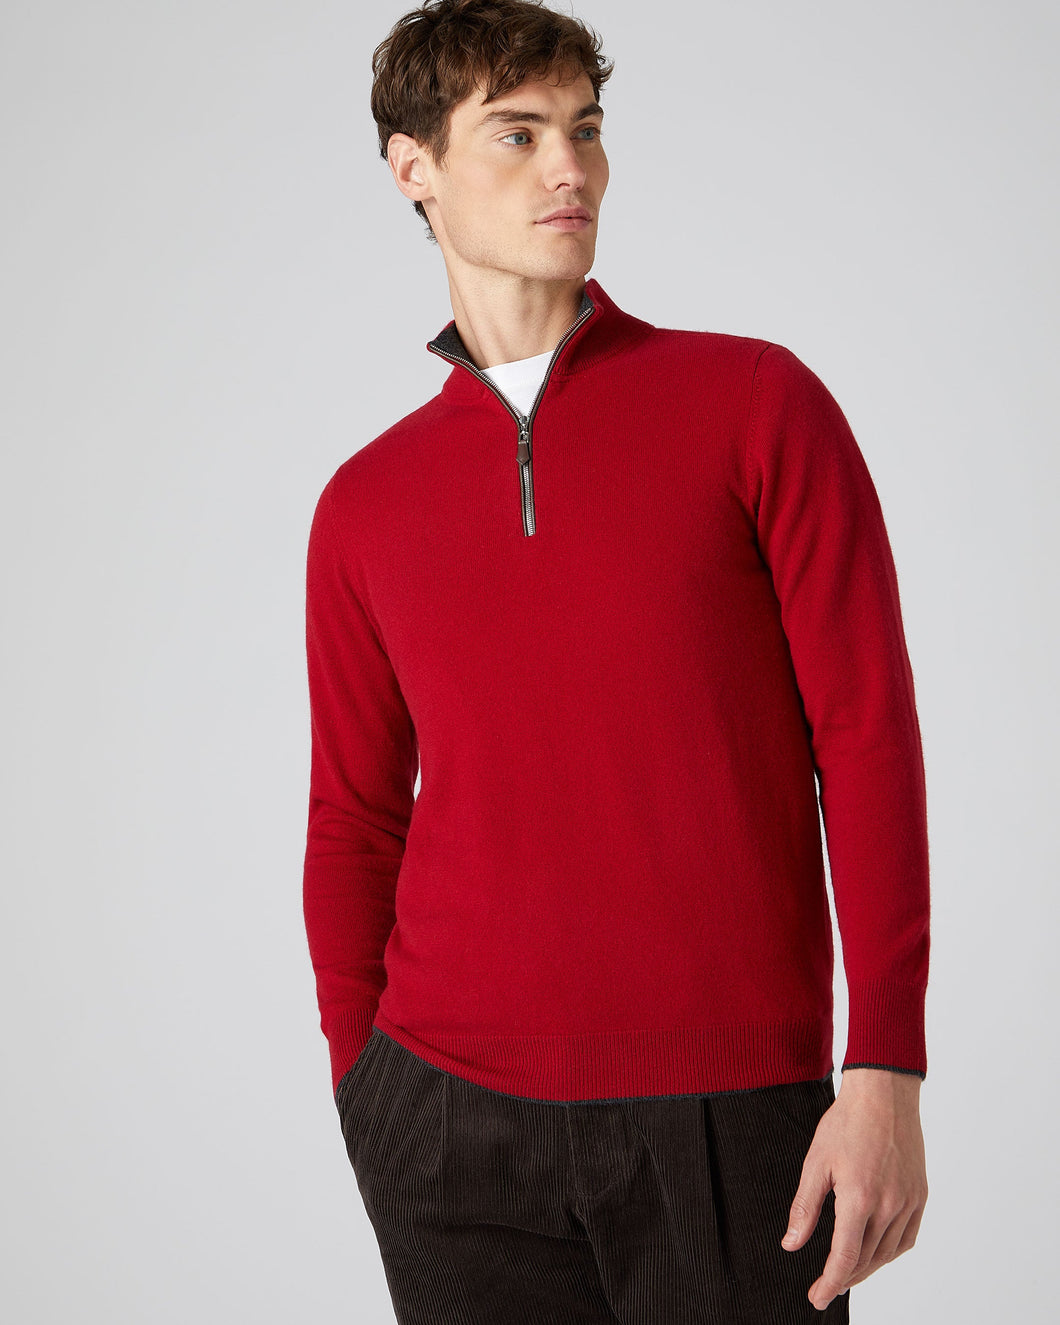 N.Peal Men's The Carnaby Half Zip Cashmere Jumper Ruby Red